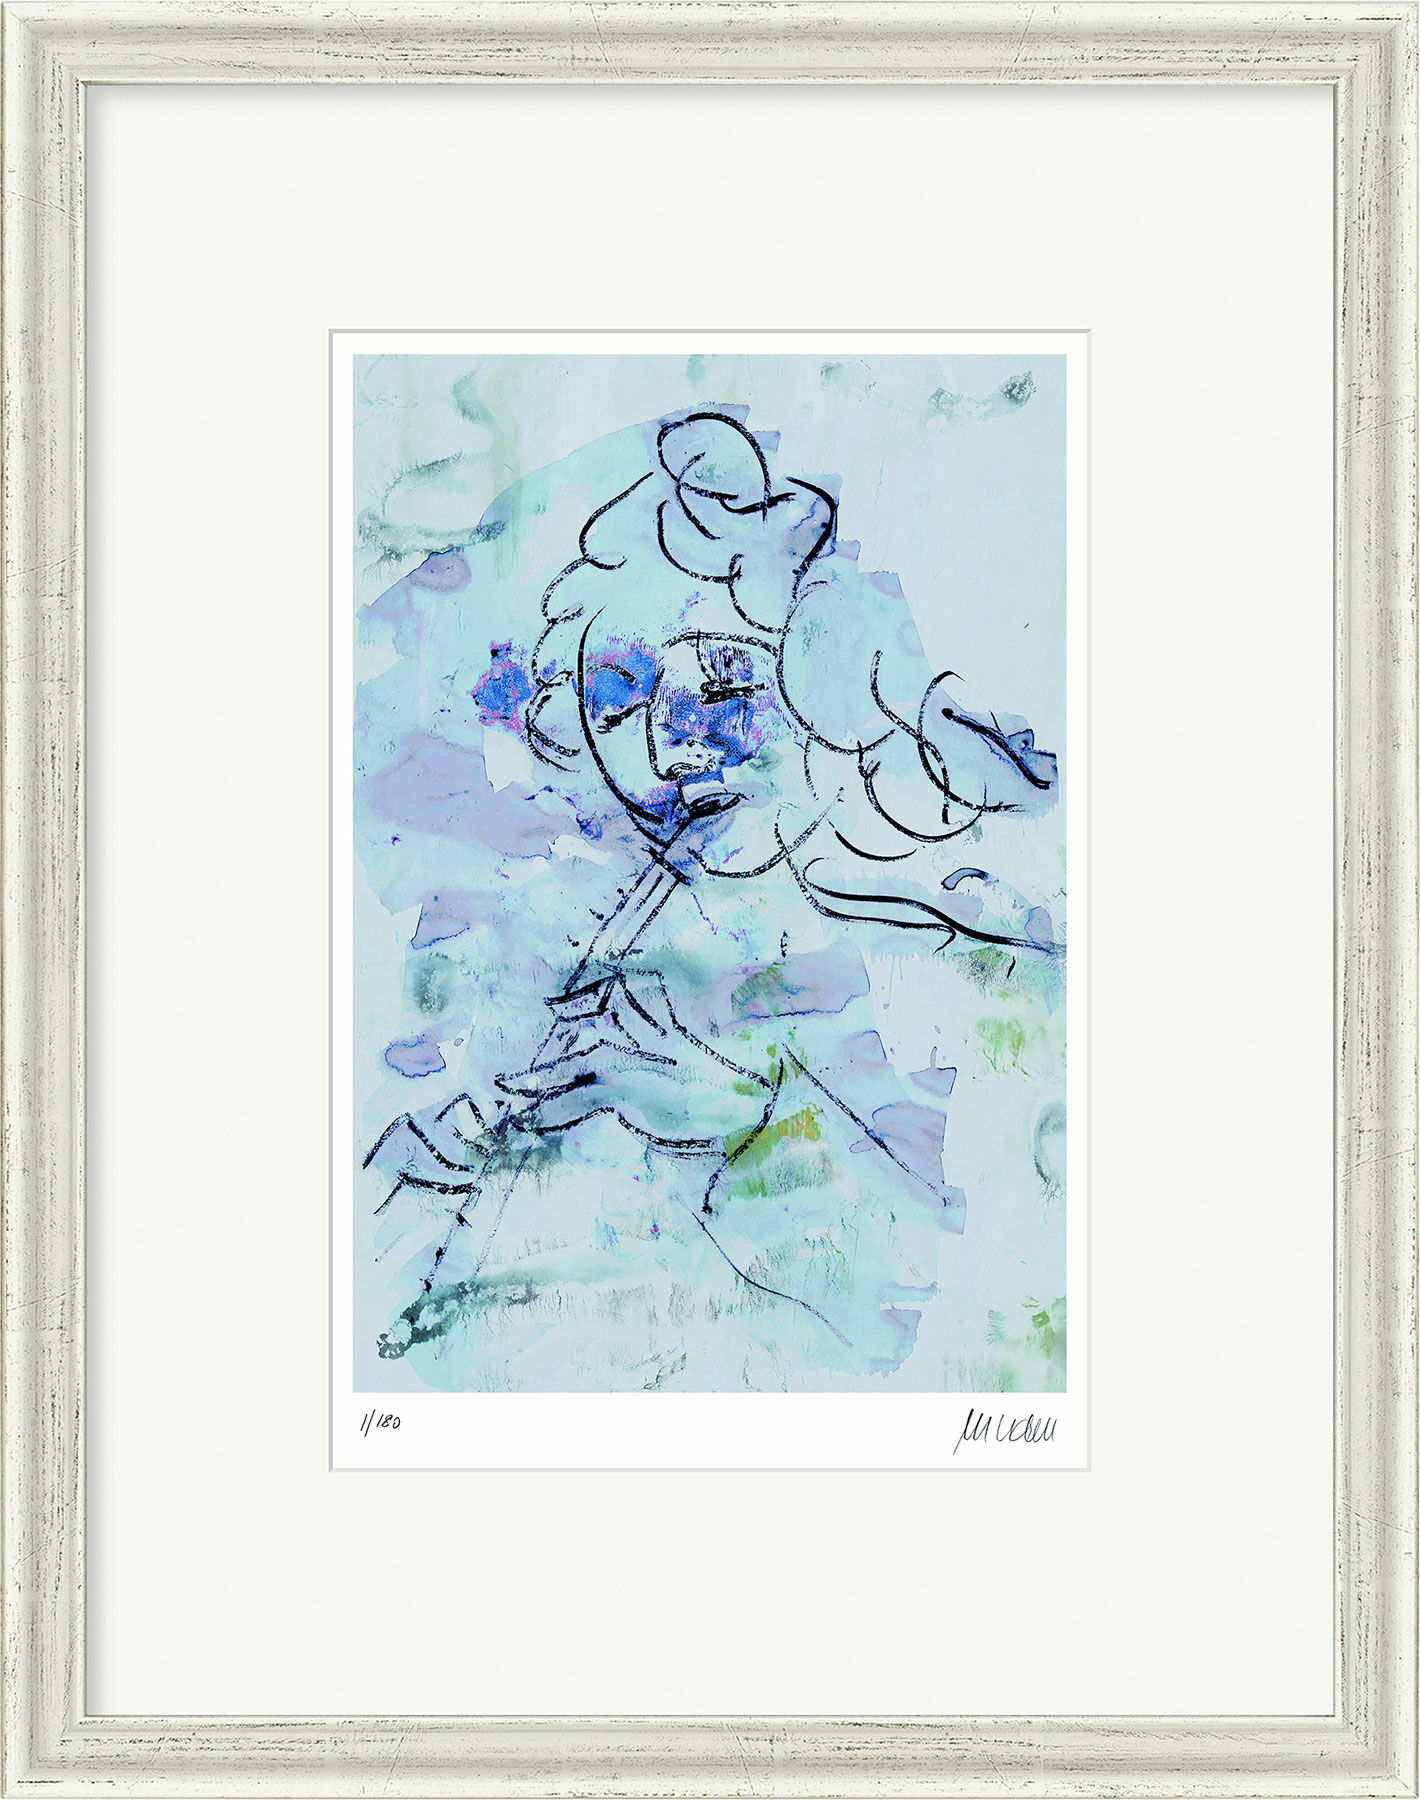 Picture "Concertino" (2017), framed by Armin Mueller-Stahl